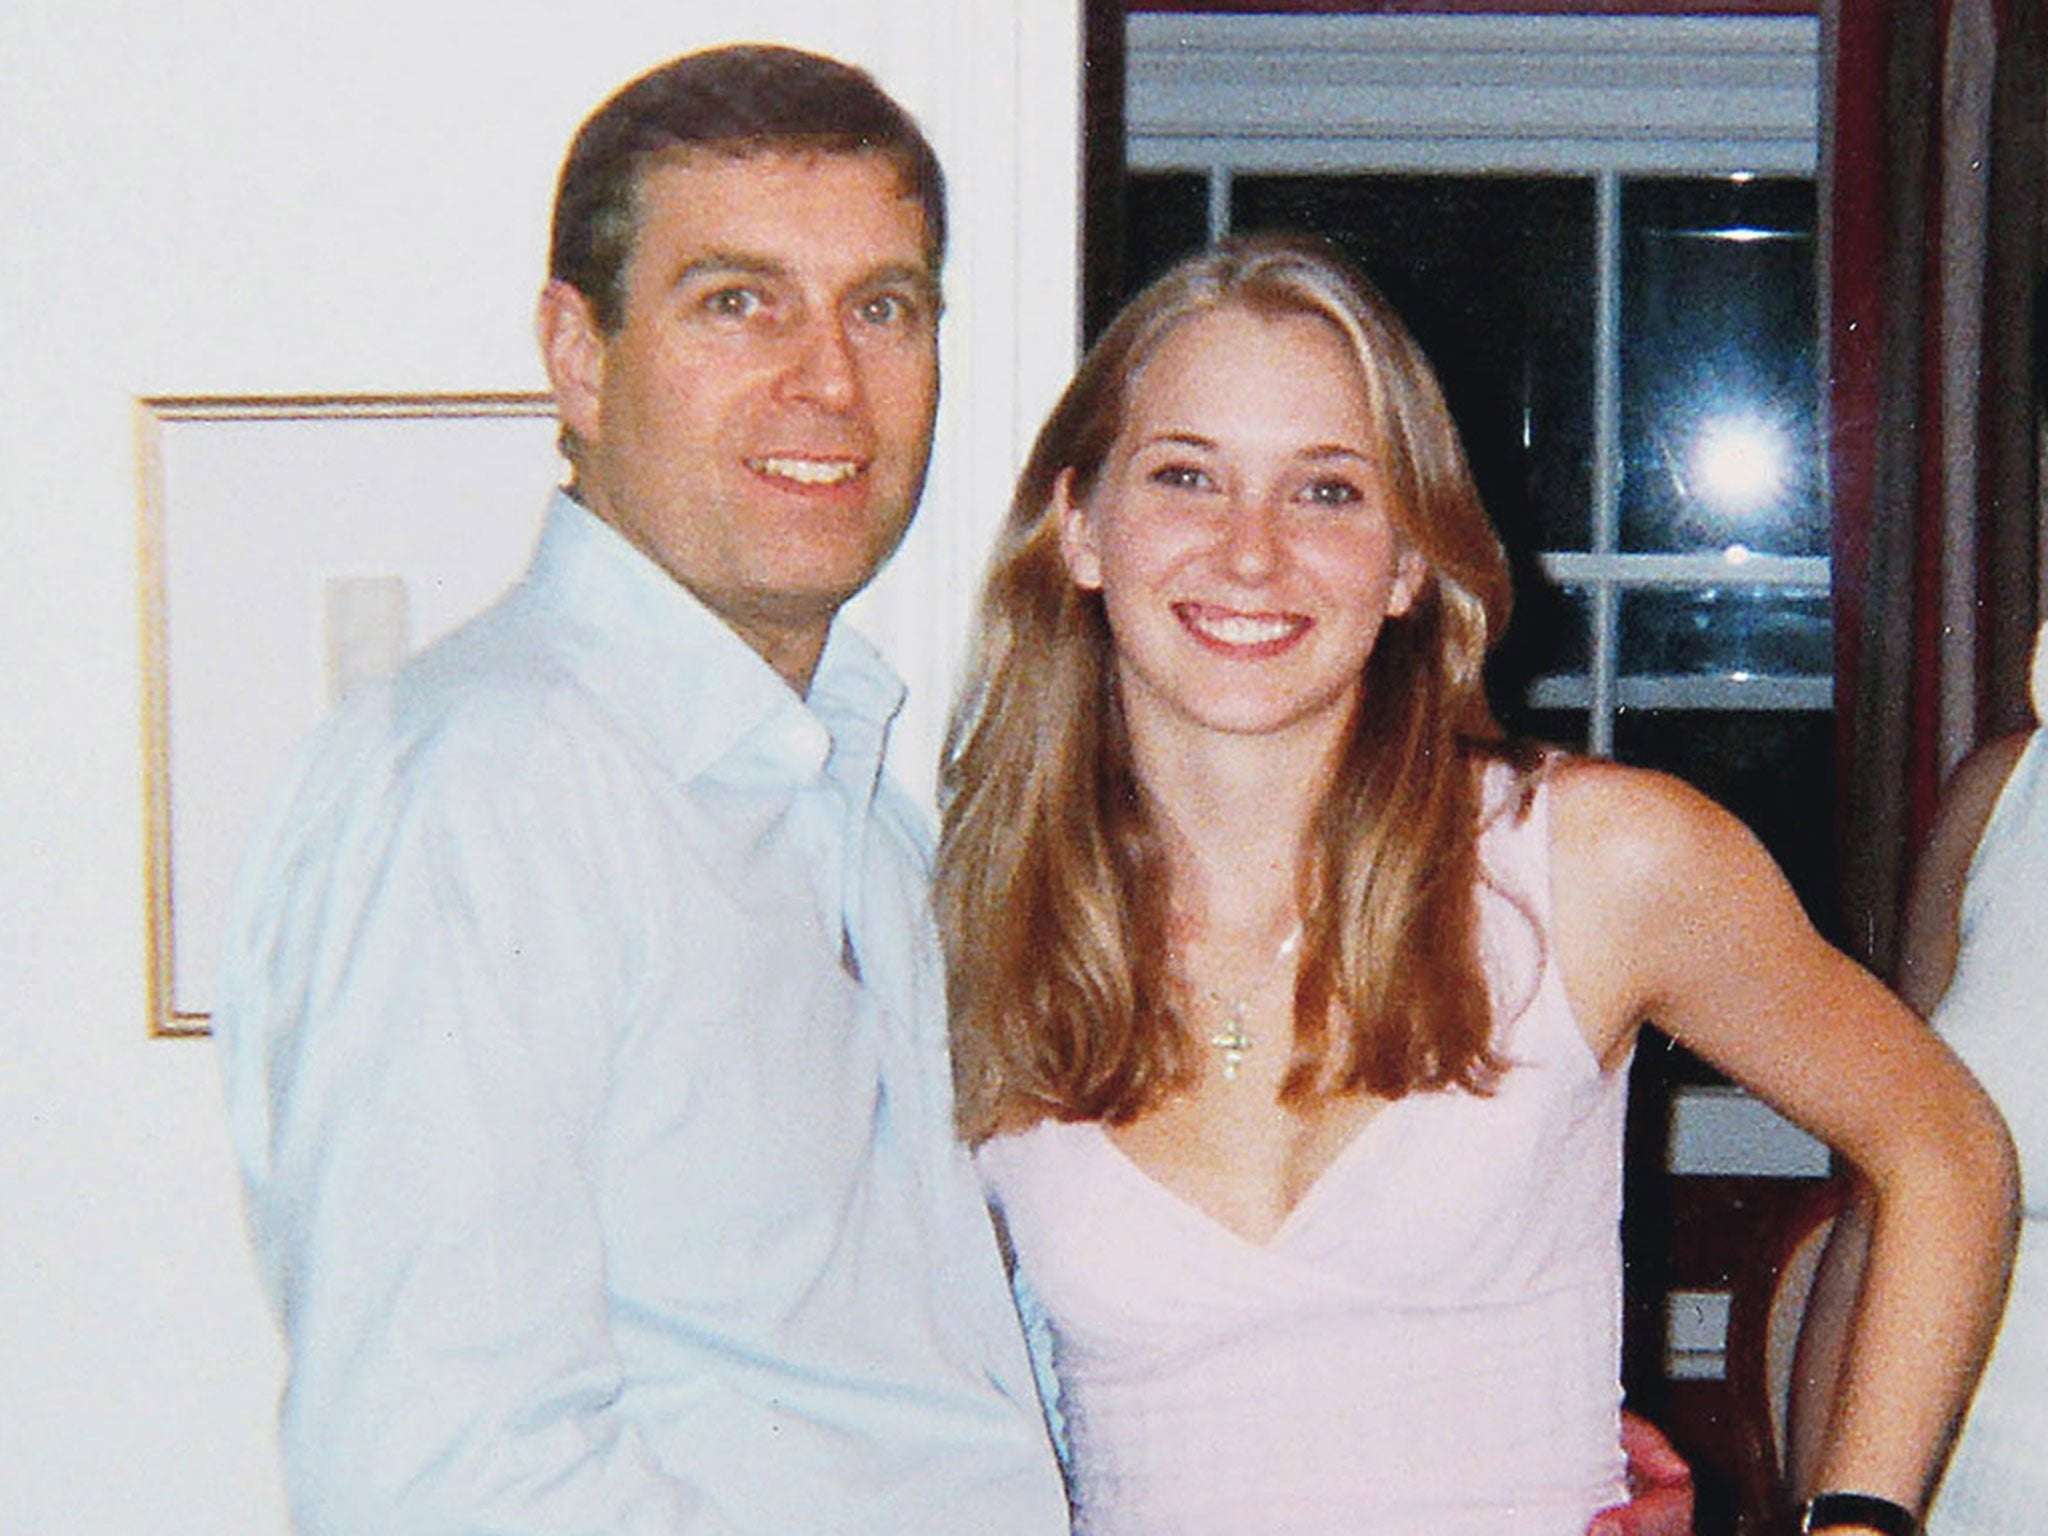 image for Prince Andrew took part in orgy with nine girls on Jeffrey Epstein’s private island, alleged victim says